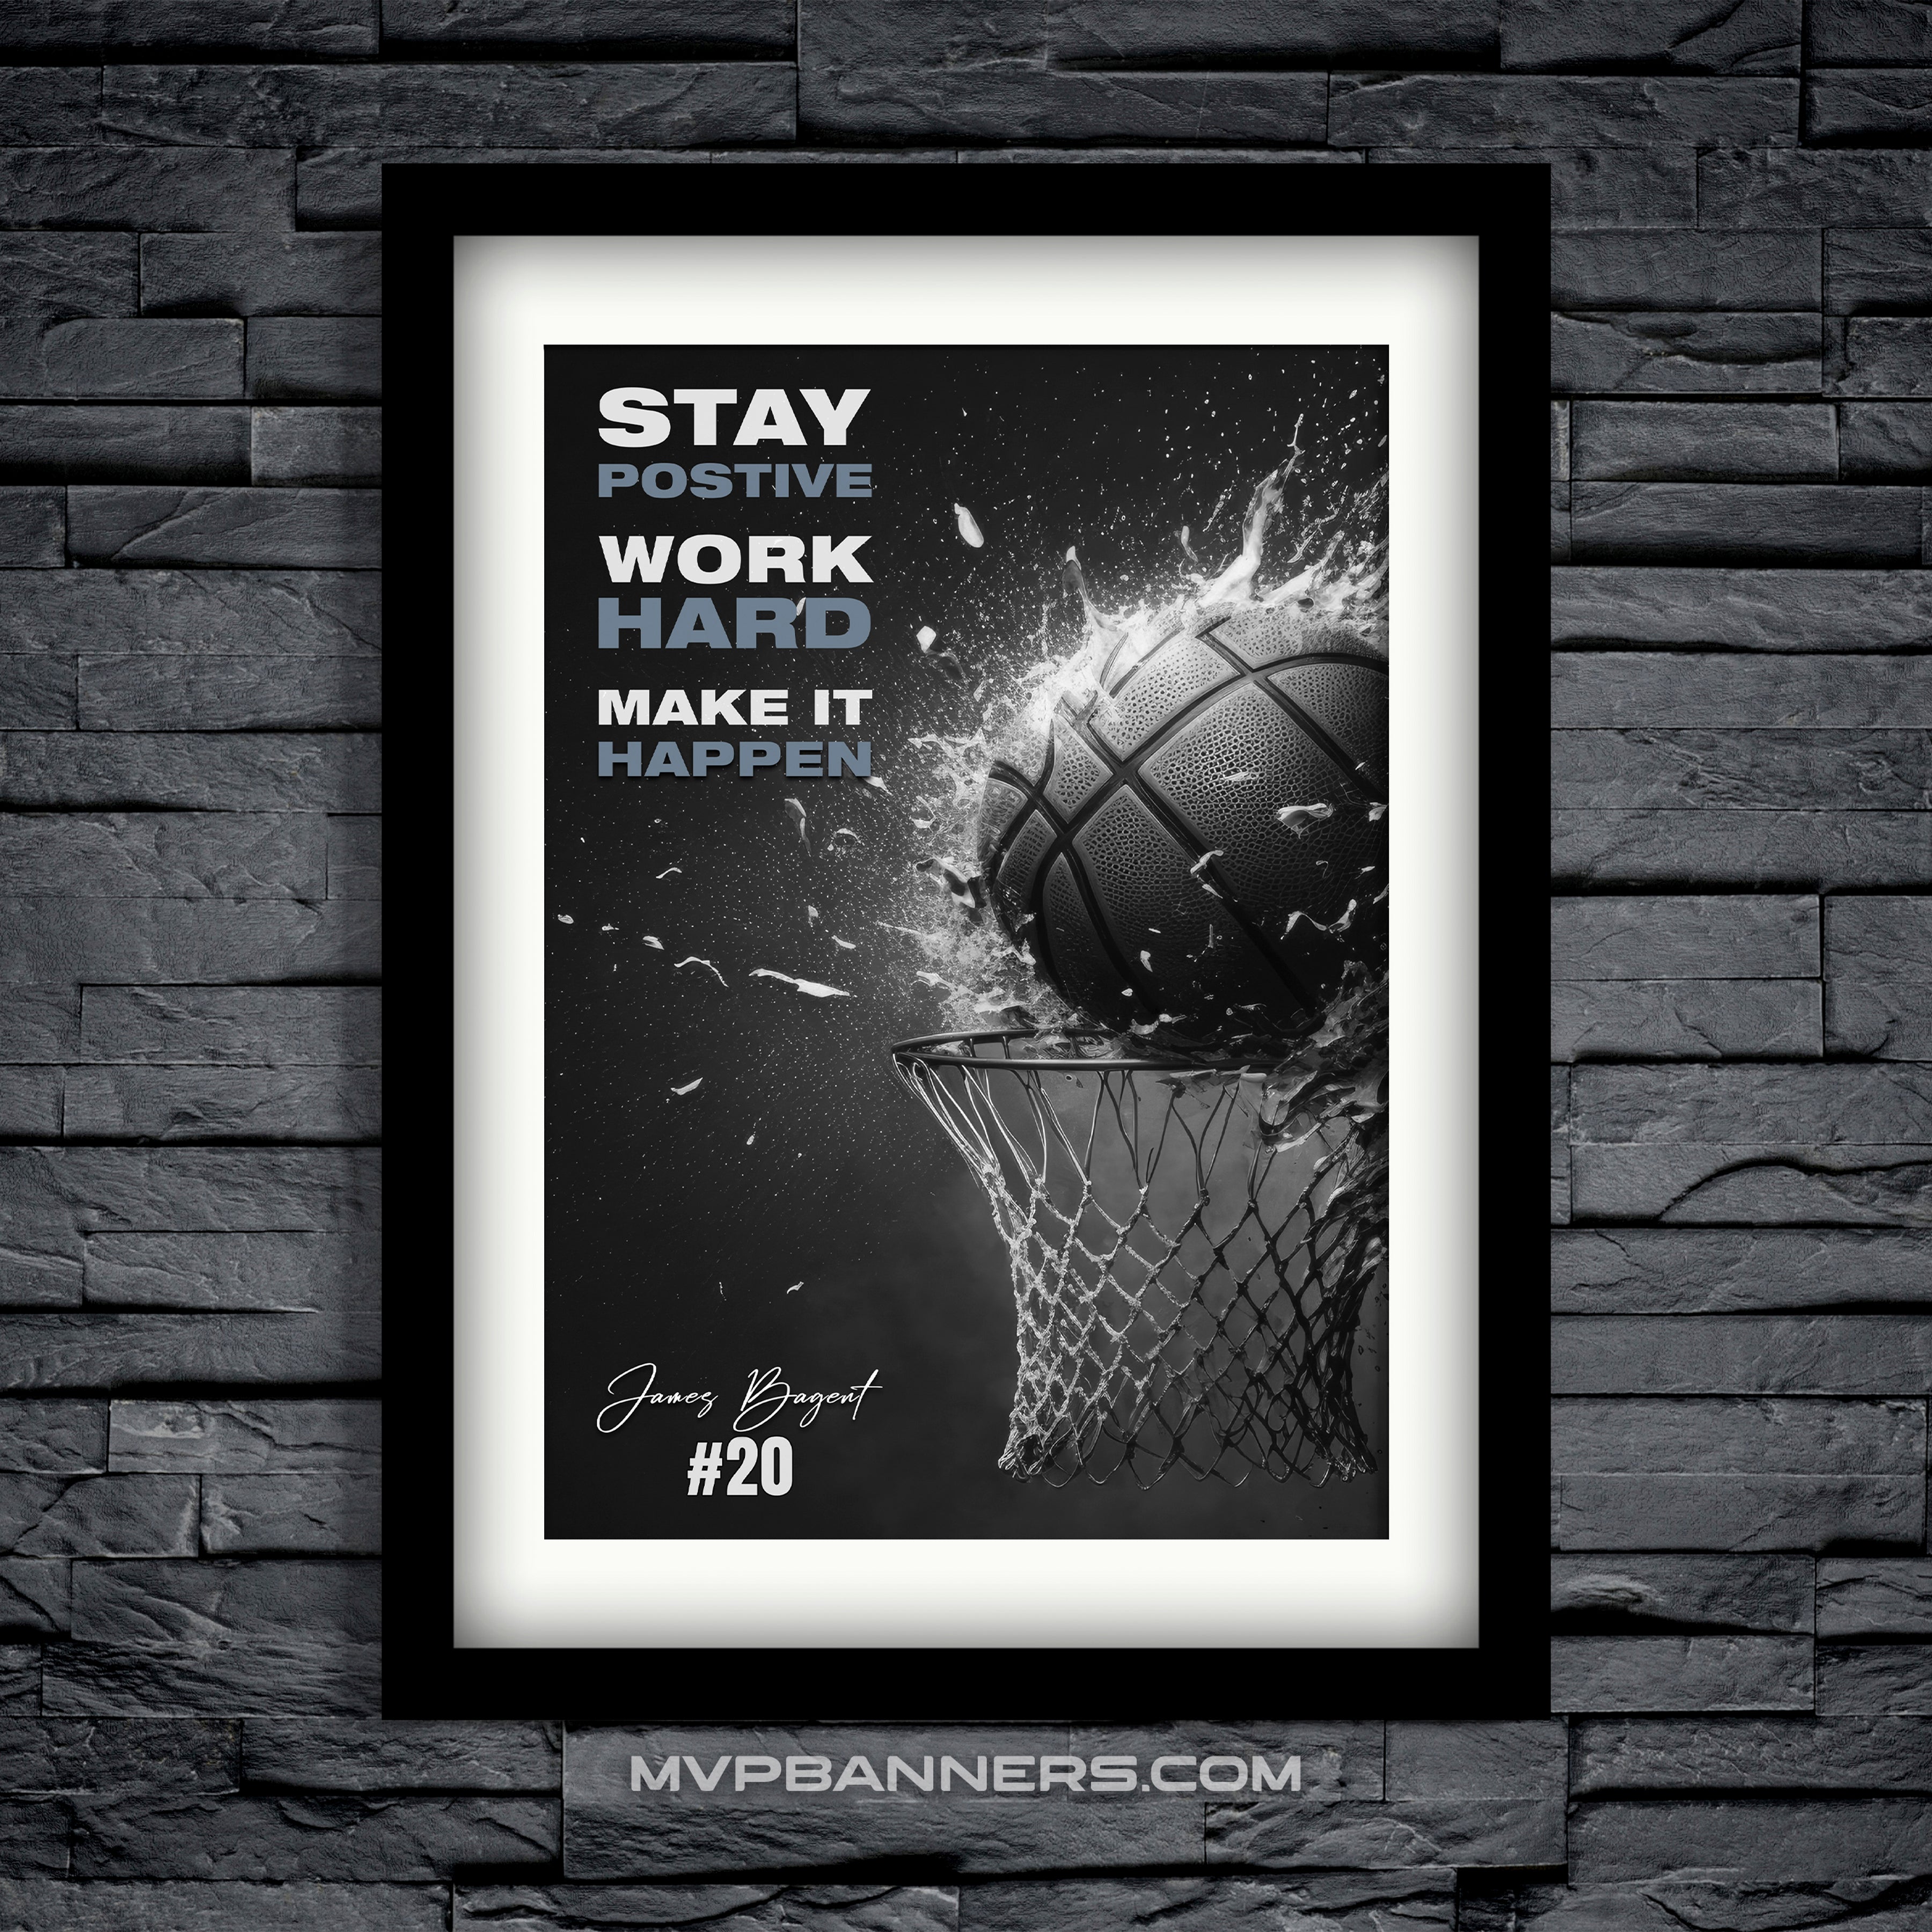 Motivational Quotes For Athletes | Inspiring Sports Quotes | Wall-Art | Basketball